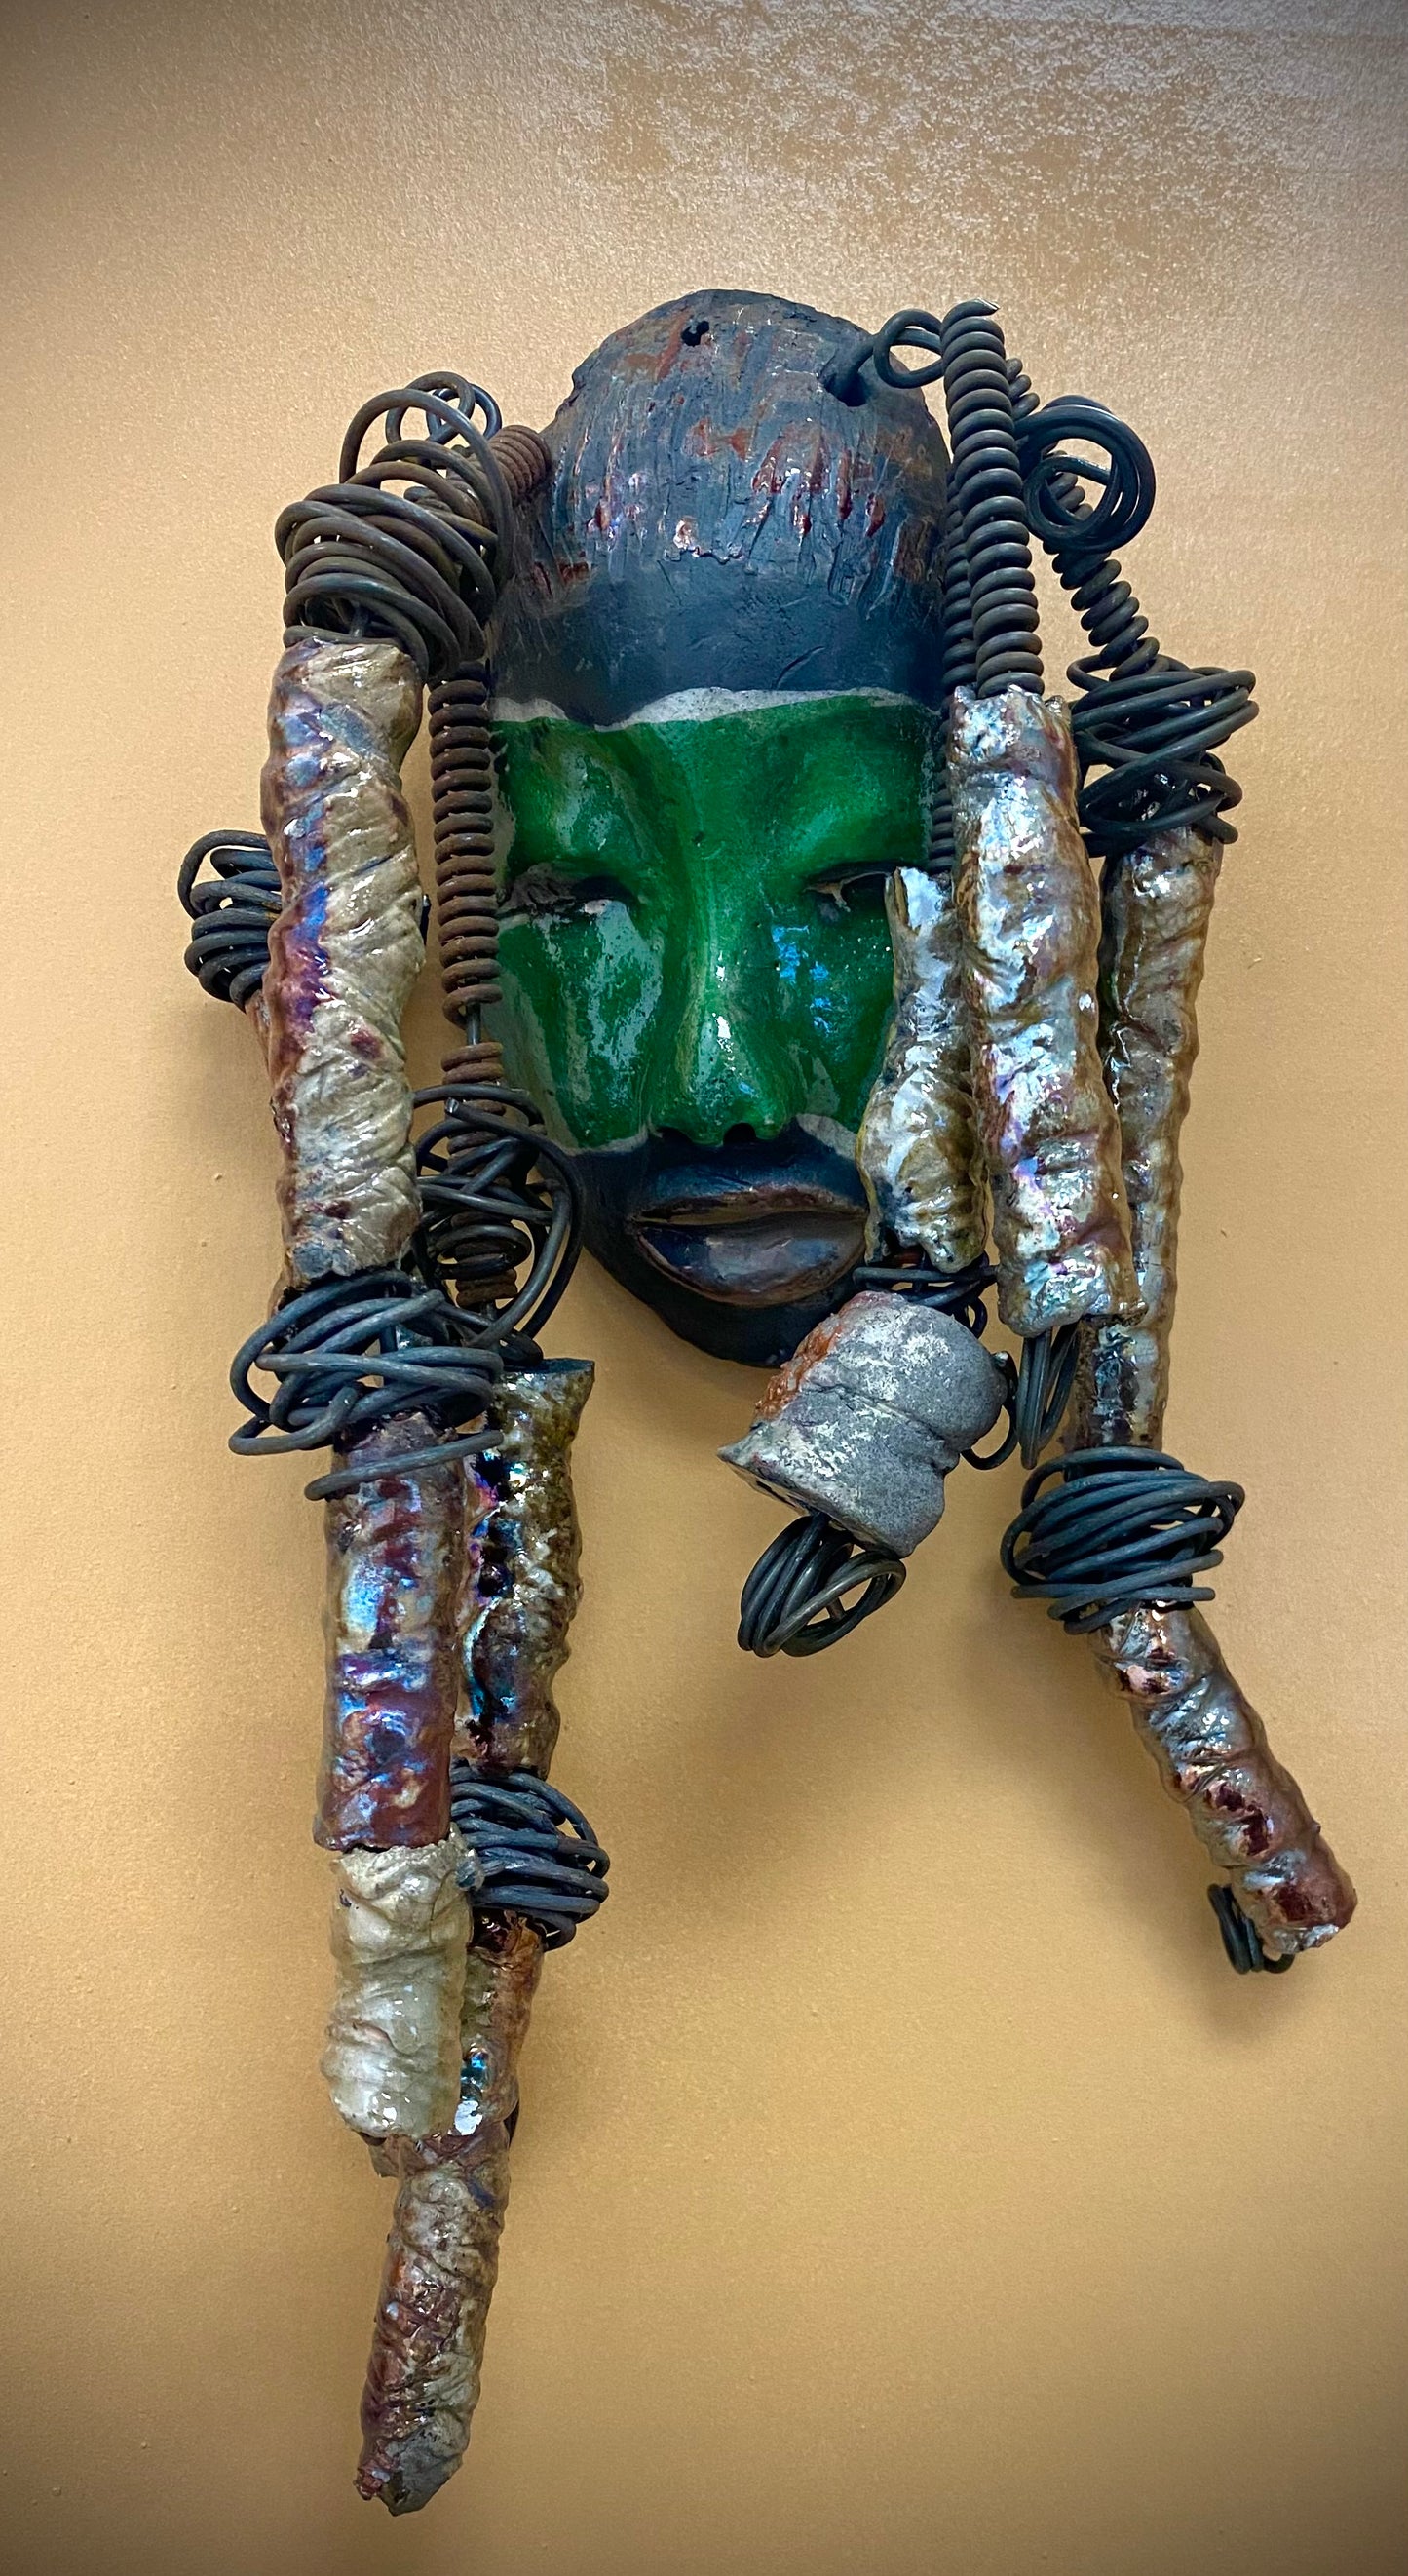 Meet Craig! I am going to make more with colors in the face like Craig. I like how the green and copper complements each other.  I started making art soon after seeing authentic African artwork at the Smithsonian Museum of African Art. I was in total awe. Craig was inspired by my visit there.  Craig is   4"x 10" and weighs 12 ozs. He has a two tone  green and copper face. Craig has hand coiled 16 gauge wire  hair with over  10 metallic raku beads.